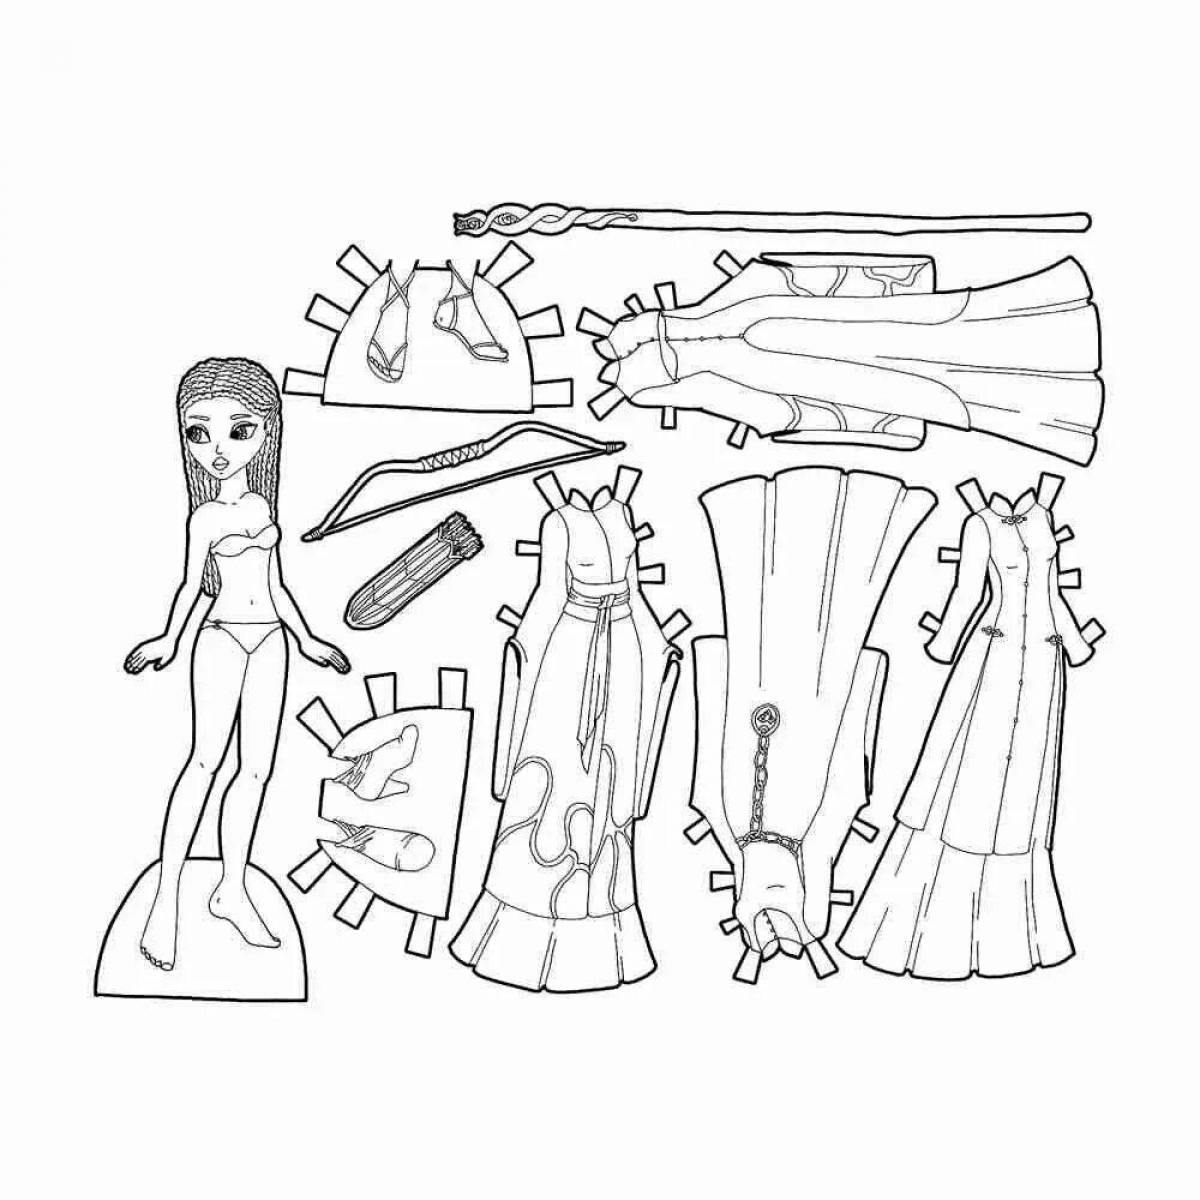 Funny paper doll with clothes